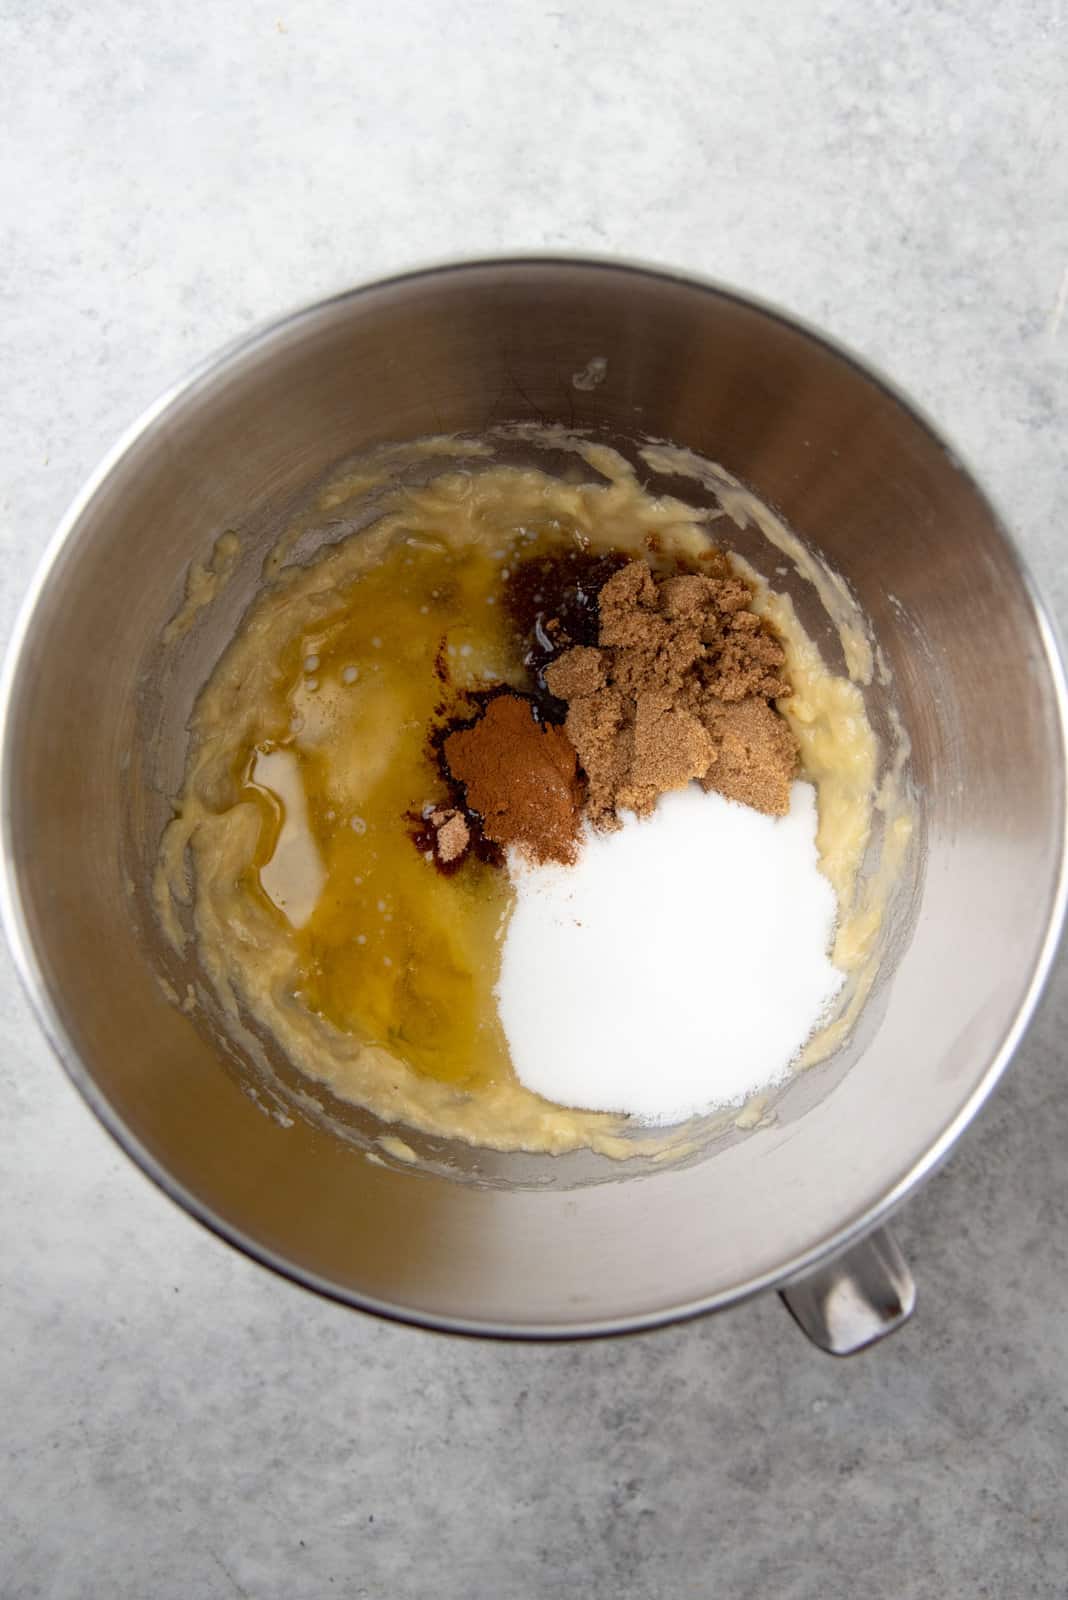 Adding the sugar, fat and flavors into the mashed bananas to make the cake batter.